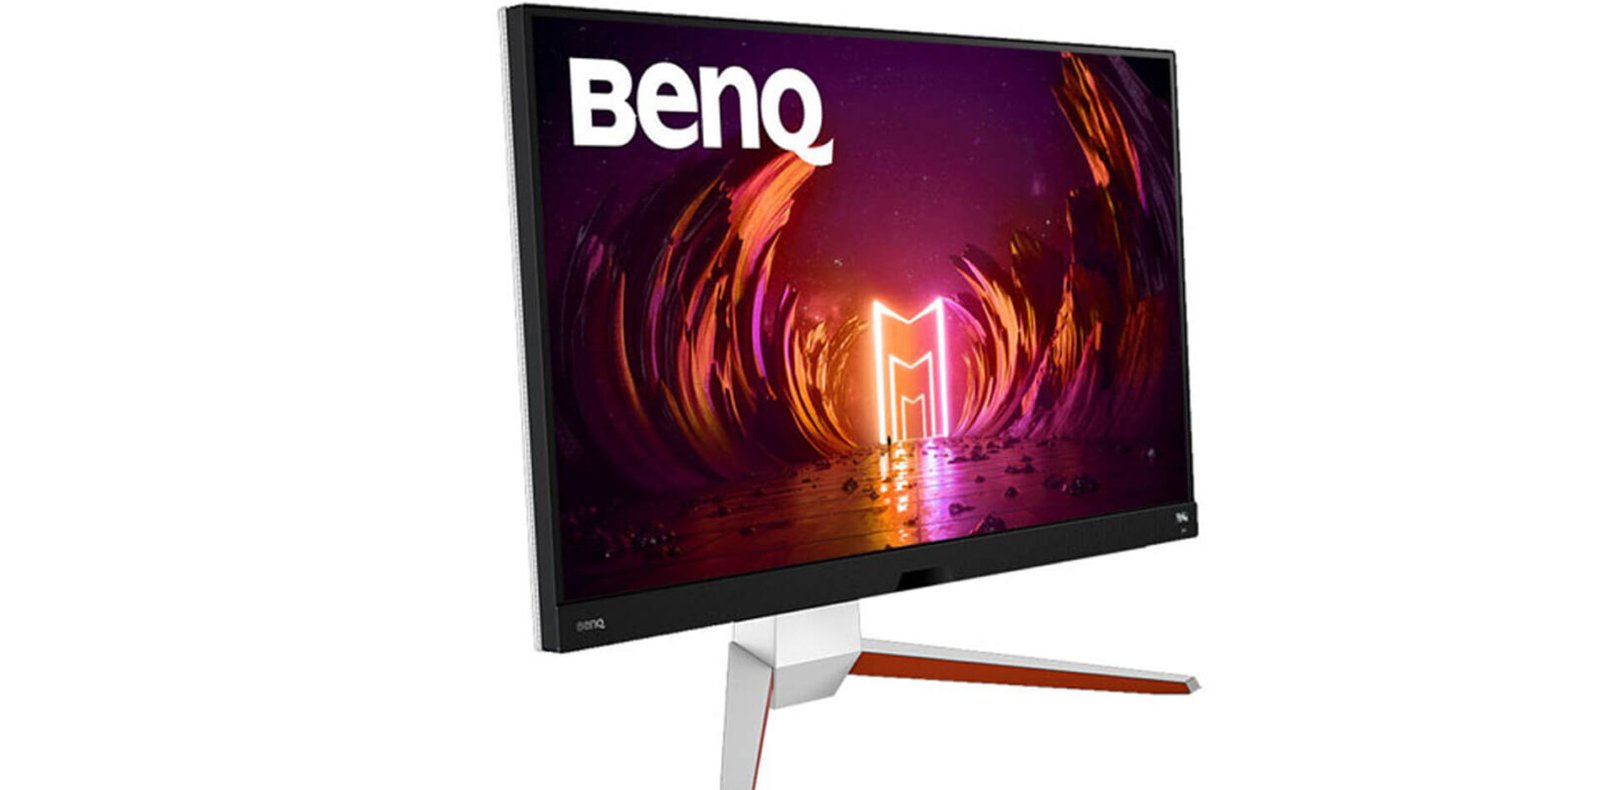 BenQ showcases its latest gaming products at CES 2022, including a